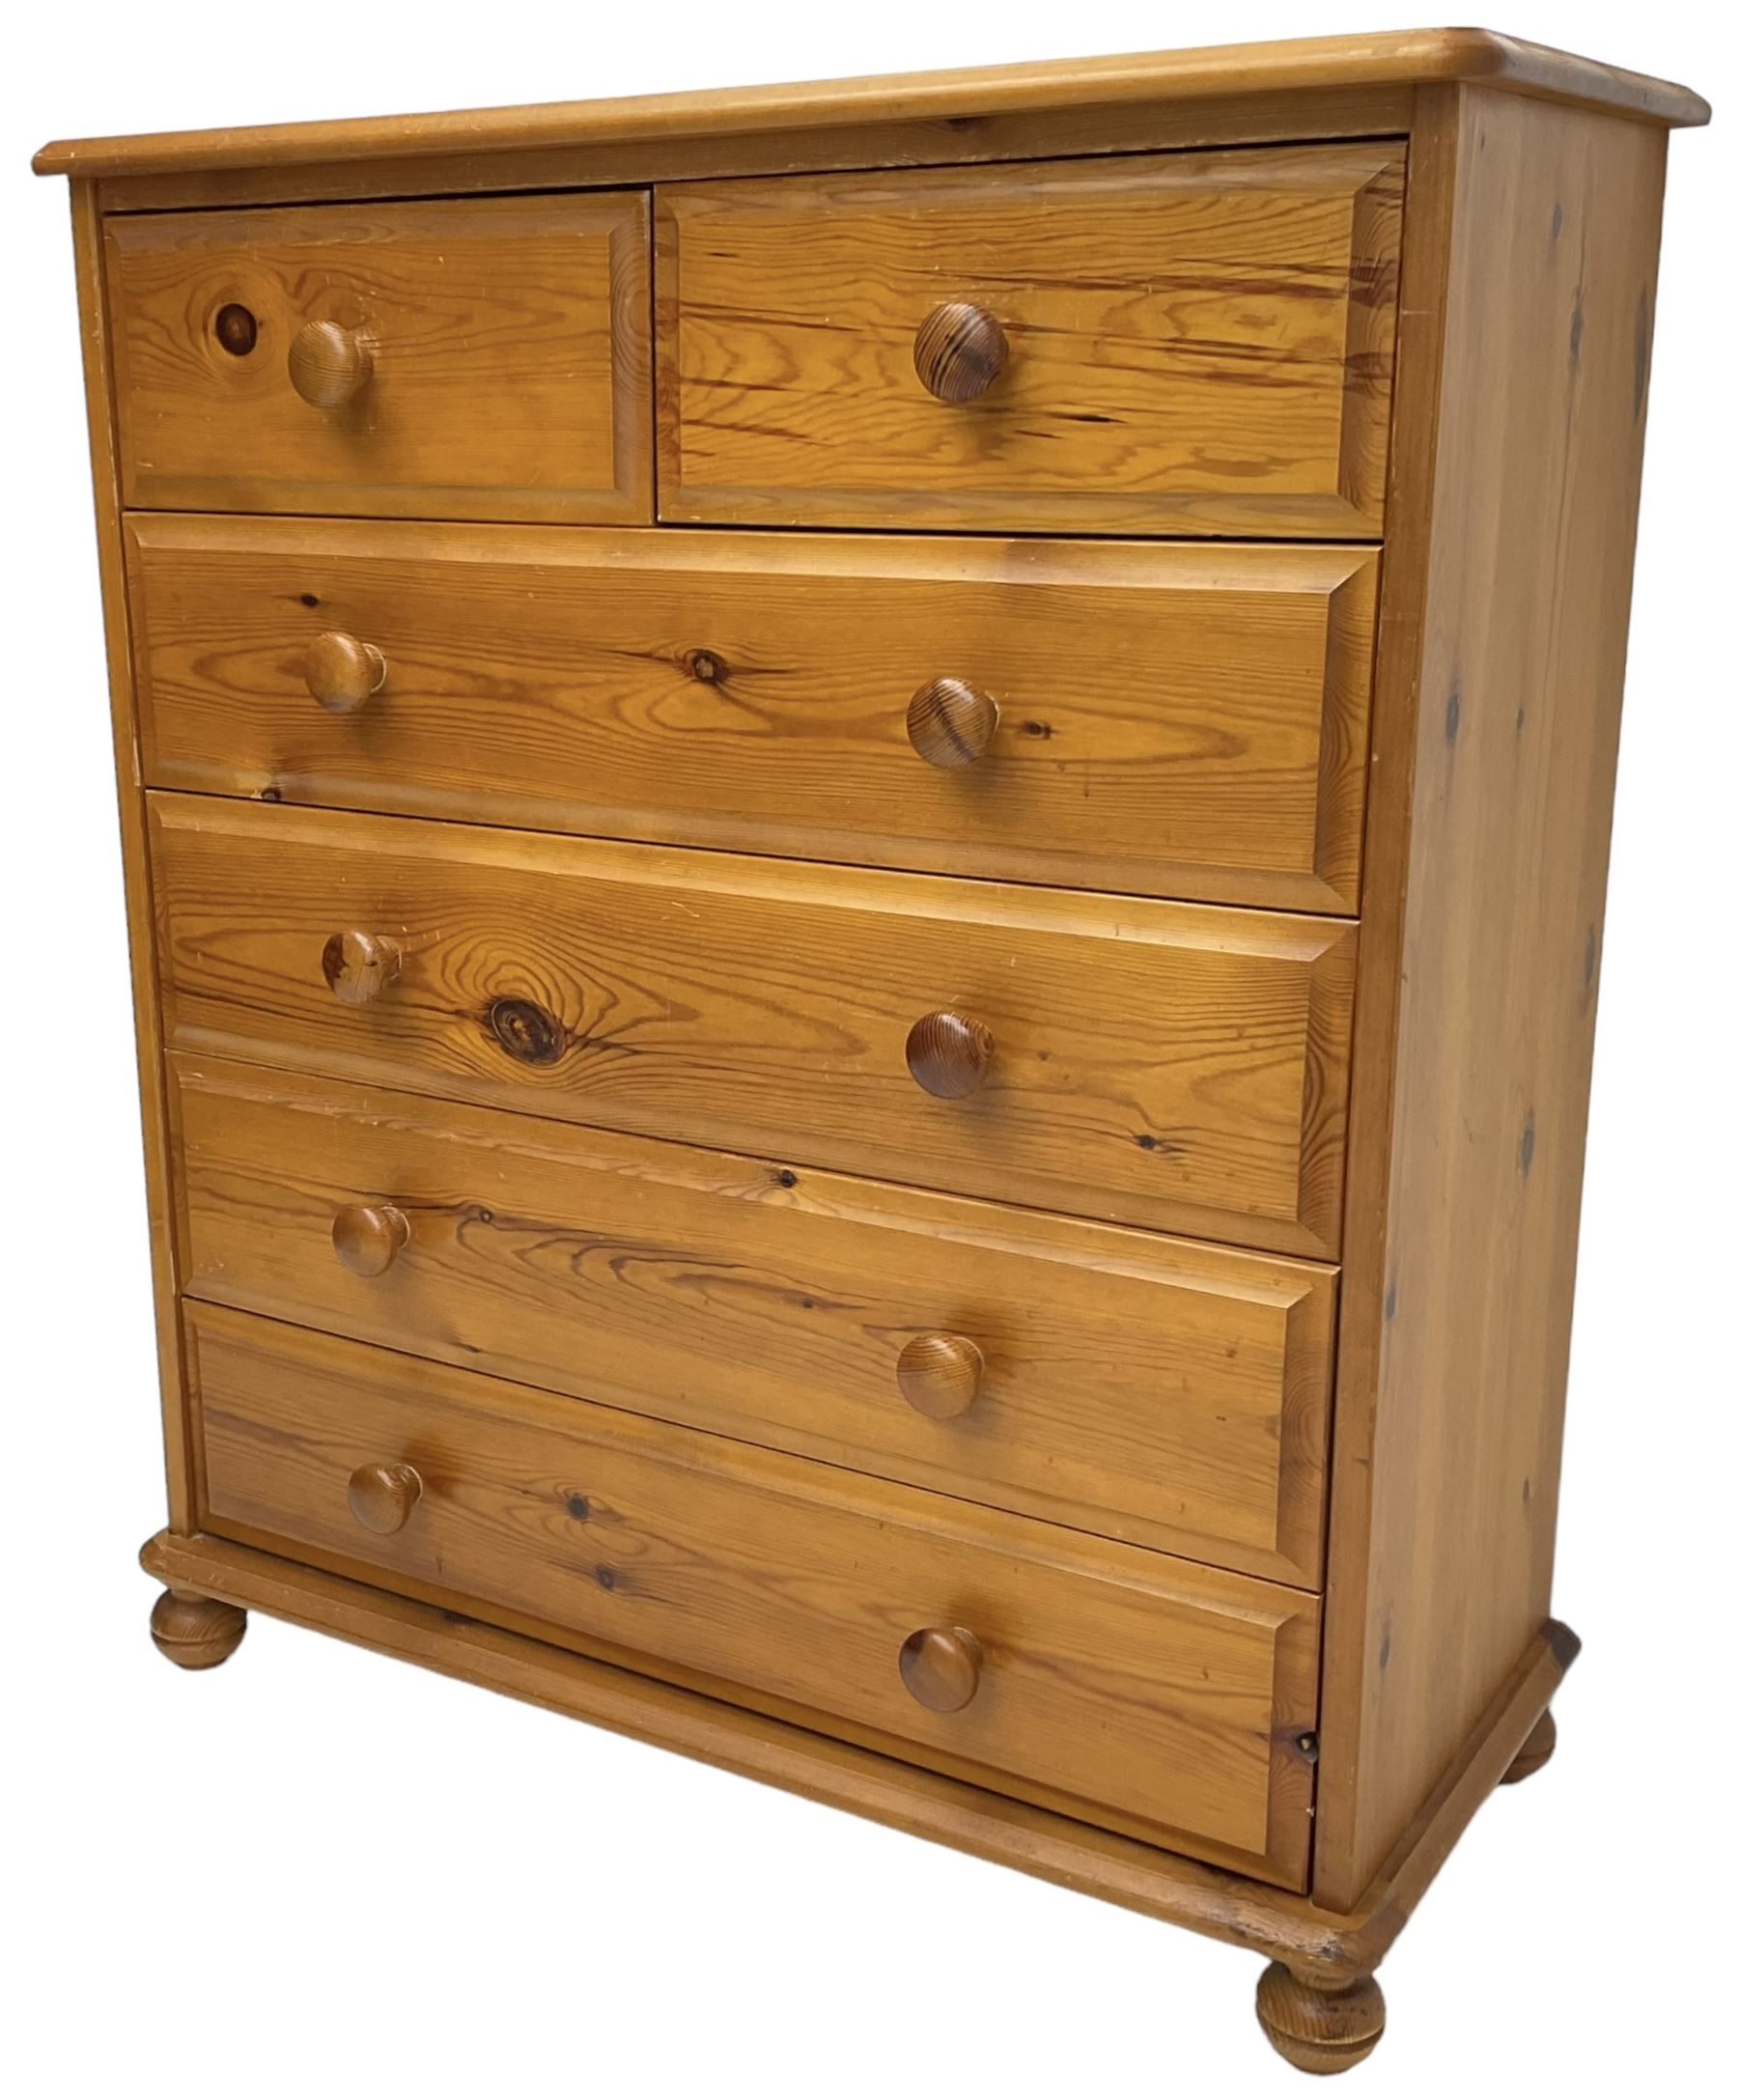 Polished pine chest - Image 8 of 12